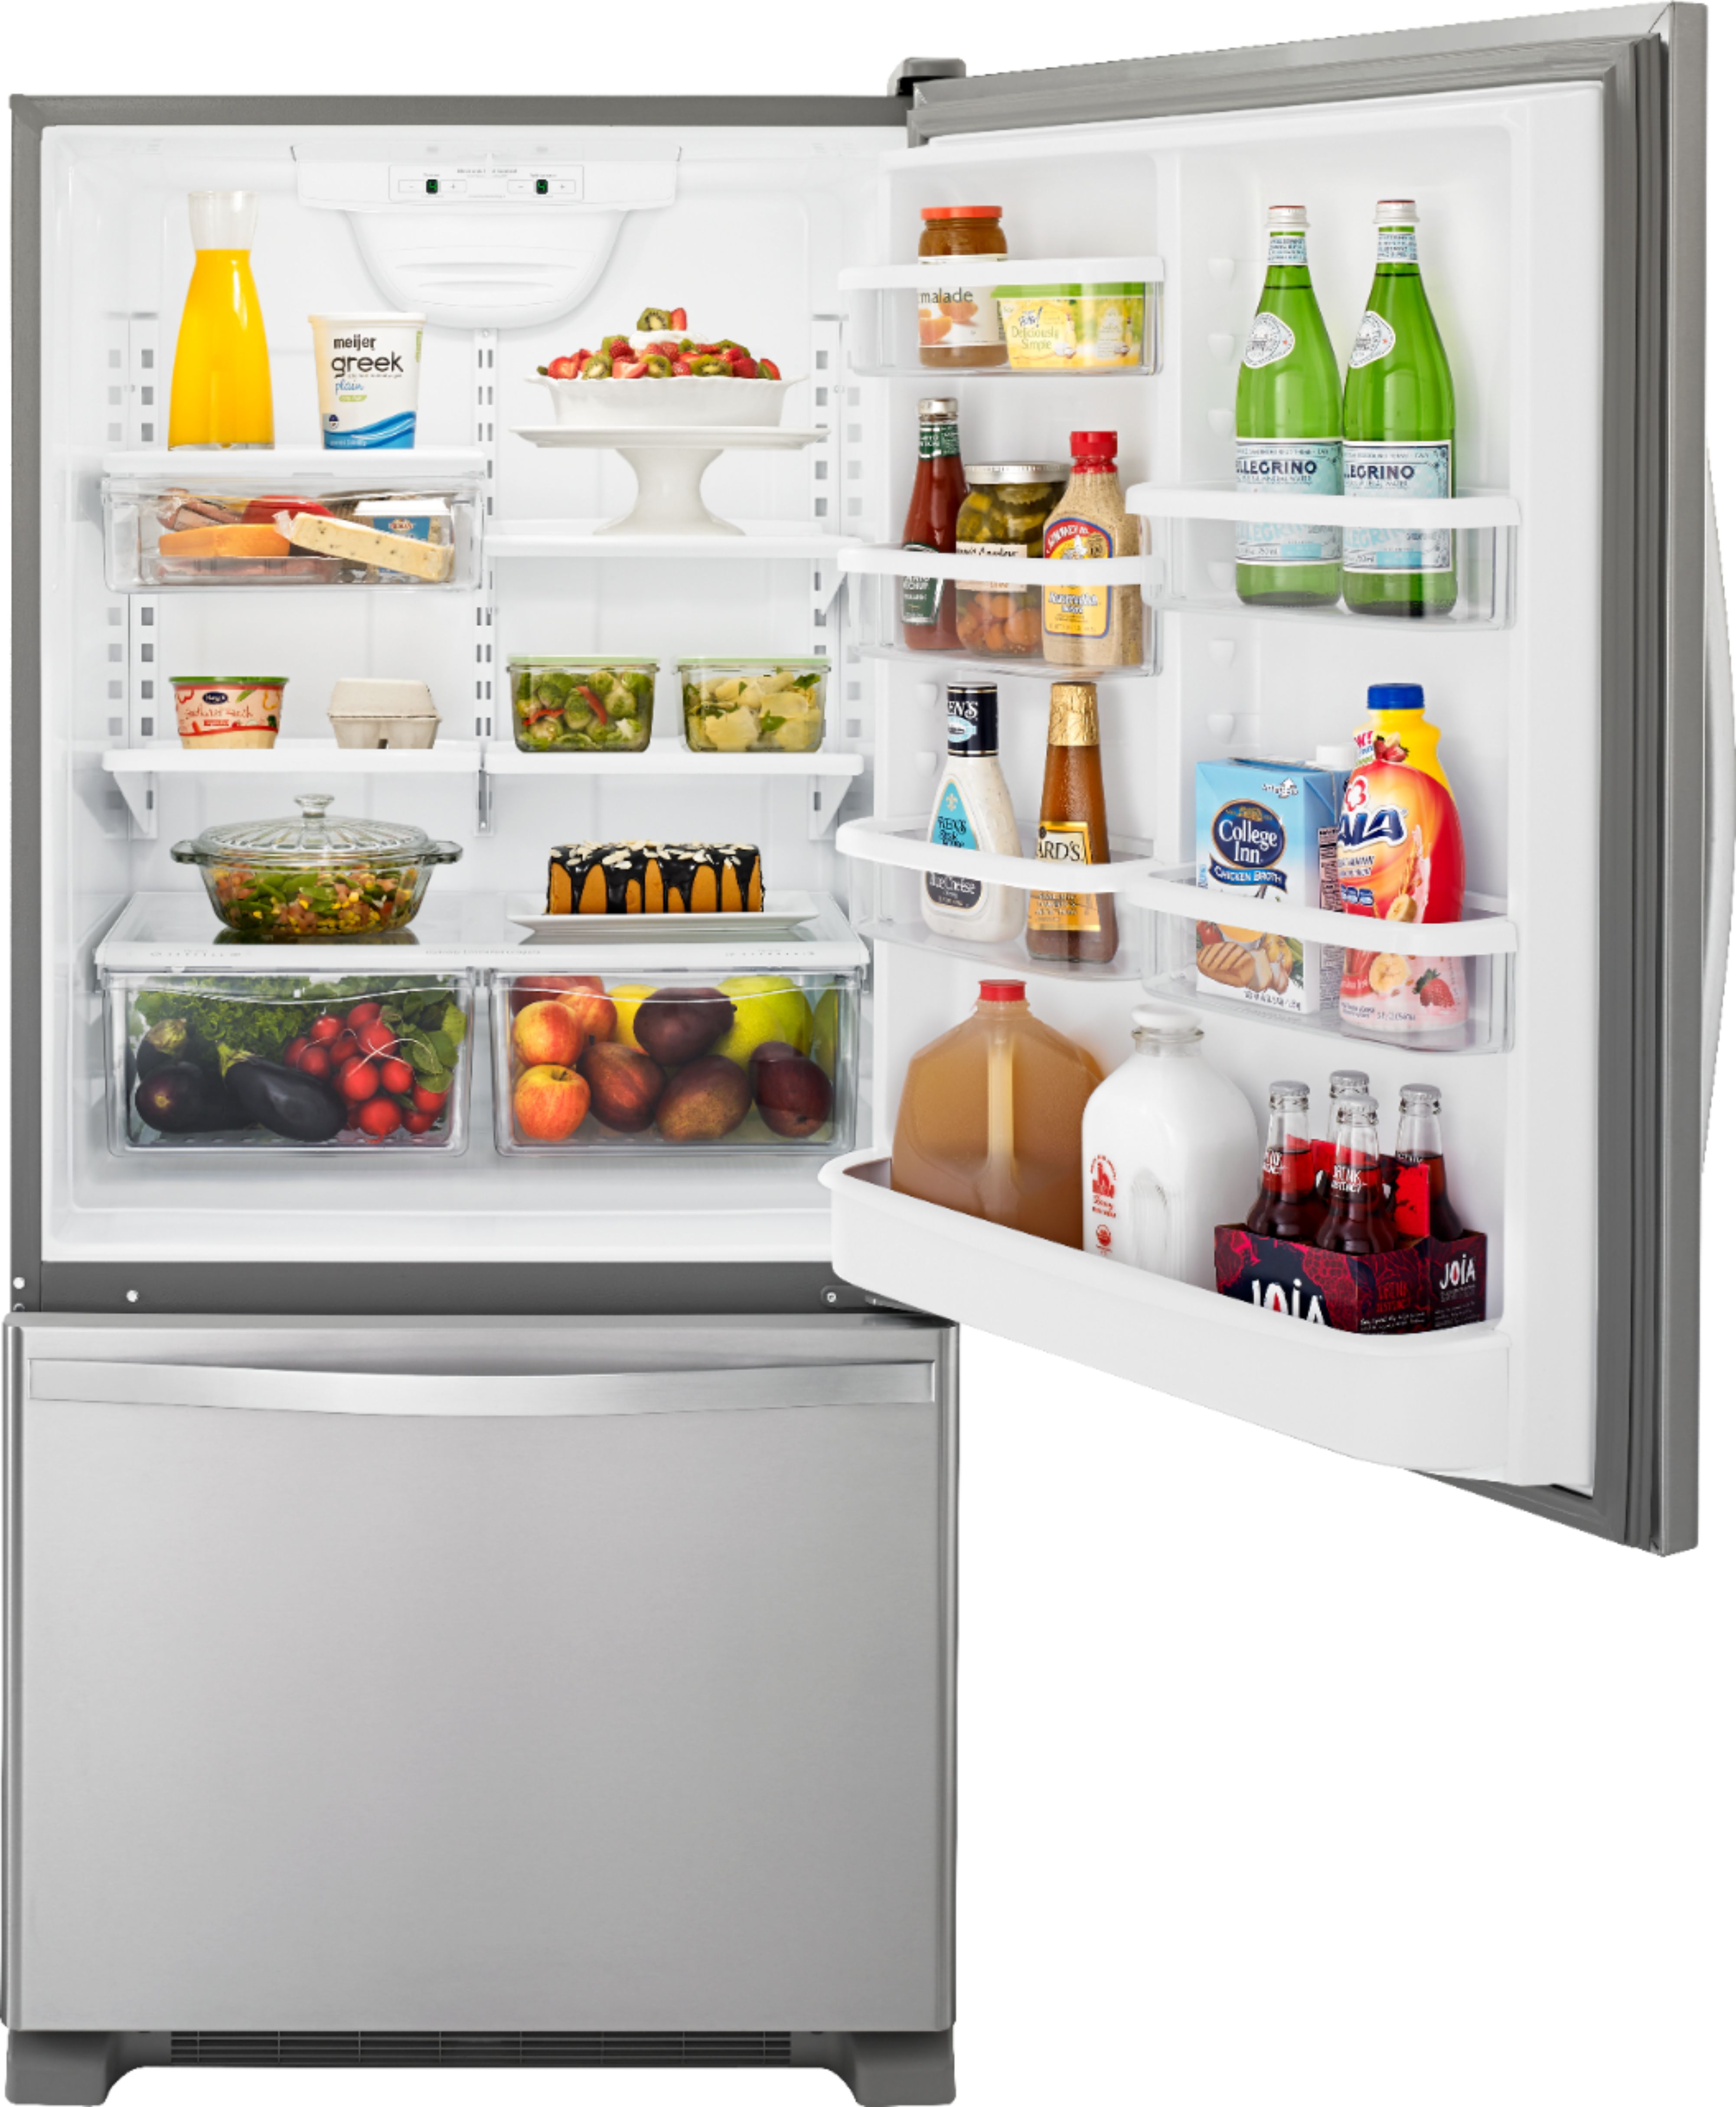 Left View: Whirlpool - 18.7 Cu. Ft. Bottom-Freezer Refrigerator with Spillguard Glass Shelves - Monochromatic Stainless Steel